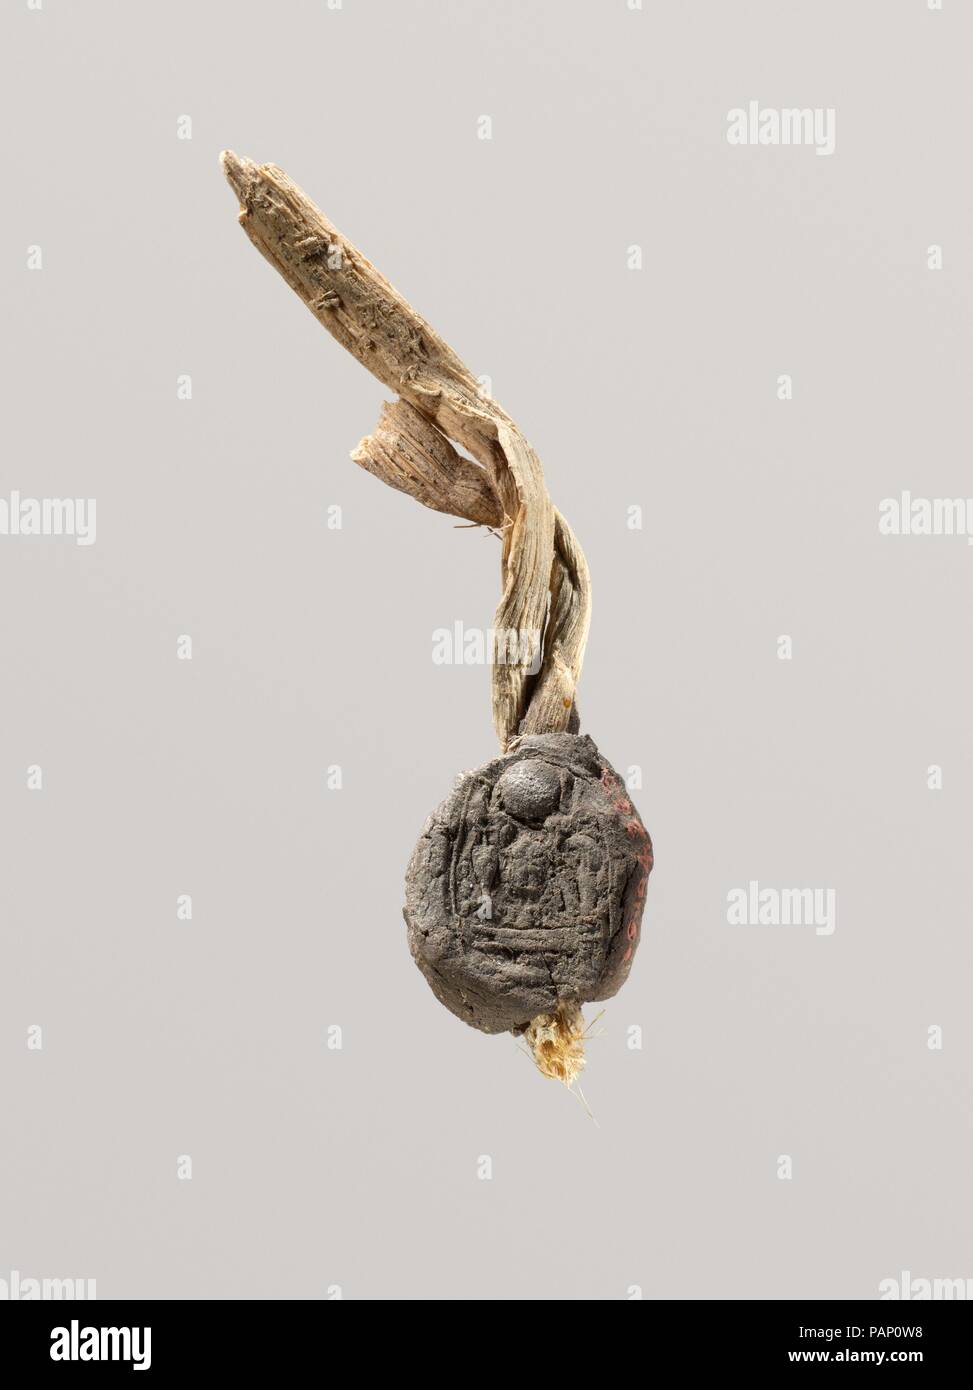 Seal Impression Attatched to a Fiber Tie from Tutankhamun's Embalming Cache. Dimensions: Seal and tie: L. 12 cm (4 3/4 in.)  Seal: L. 2.5 cm (1 in.); W. 2 cm (13/16 in.). Dynasty: Dynasty 18. Reign: reign of Tutankhamun. Date: ca. 1336-1327 B.C..  This mud sealing has similar to that on 09.184.262. Museum: Metropolitan Museum of Art, New York, USA. Stock Photo